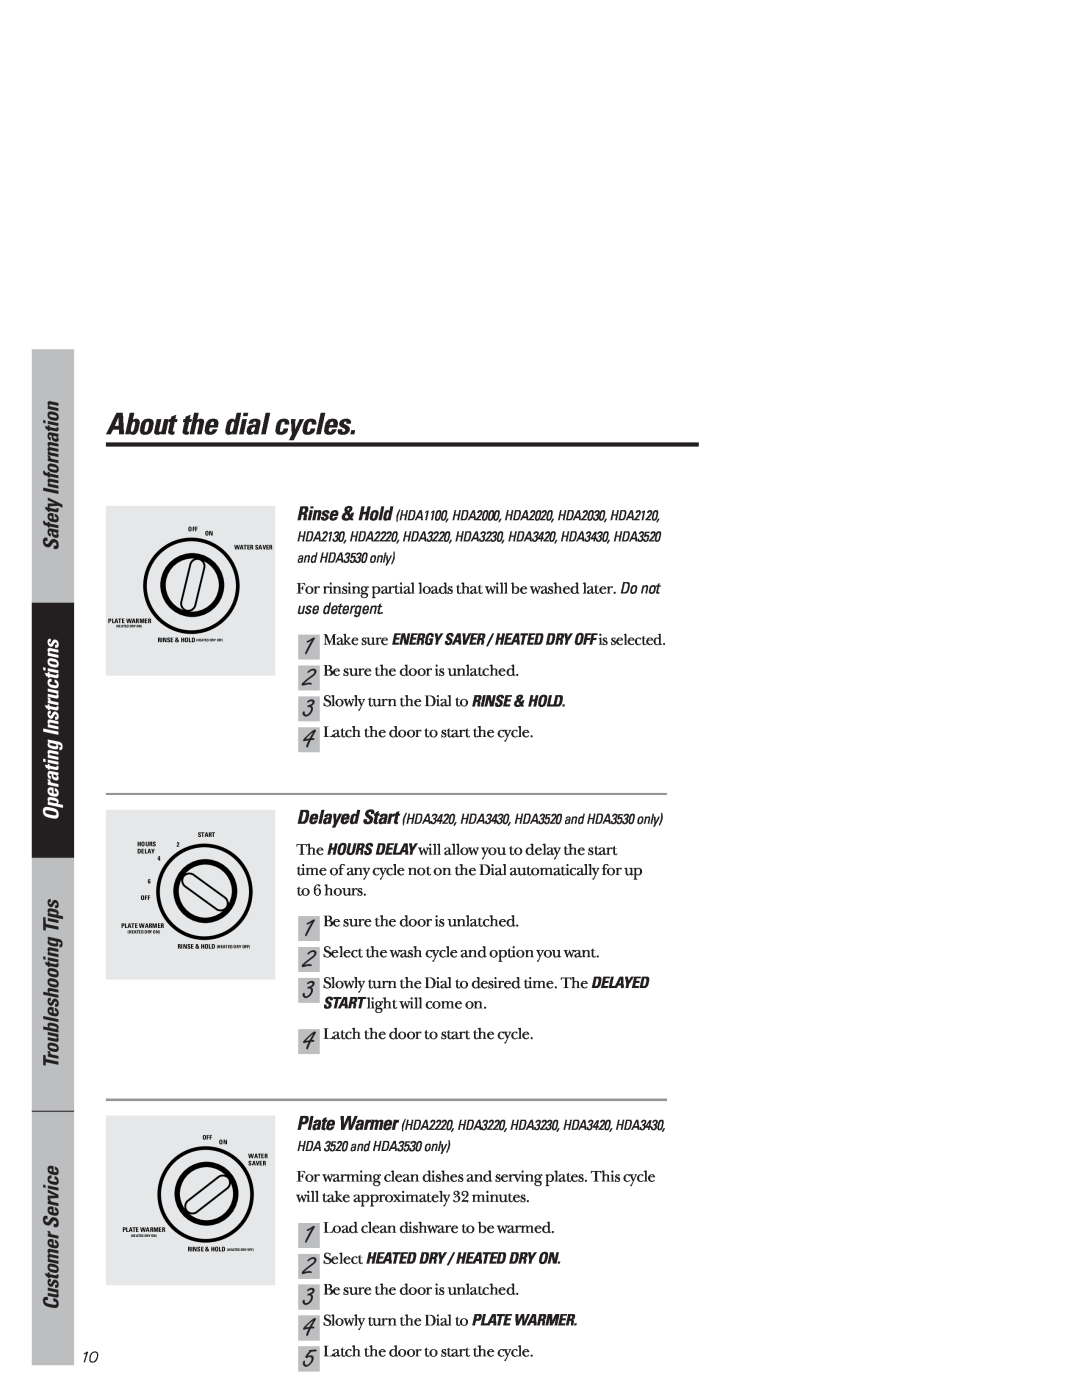 Hotpoint HDA3530, HDA3520 owner manual About the dial cycles, Troubleshooting Tips, Safety Information, Customer Service 